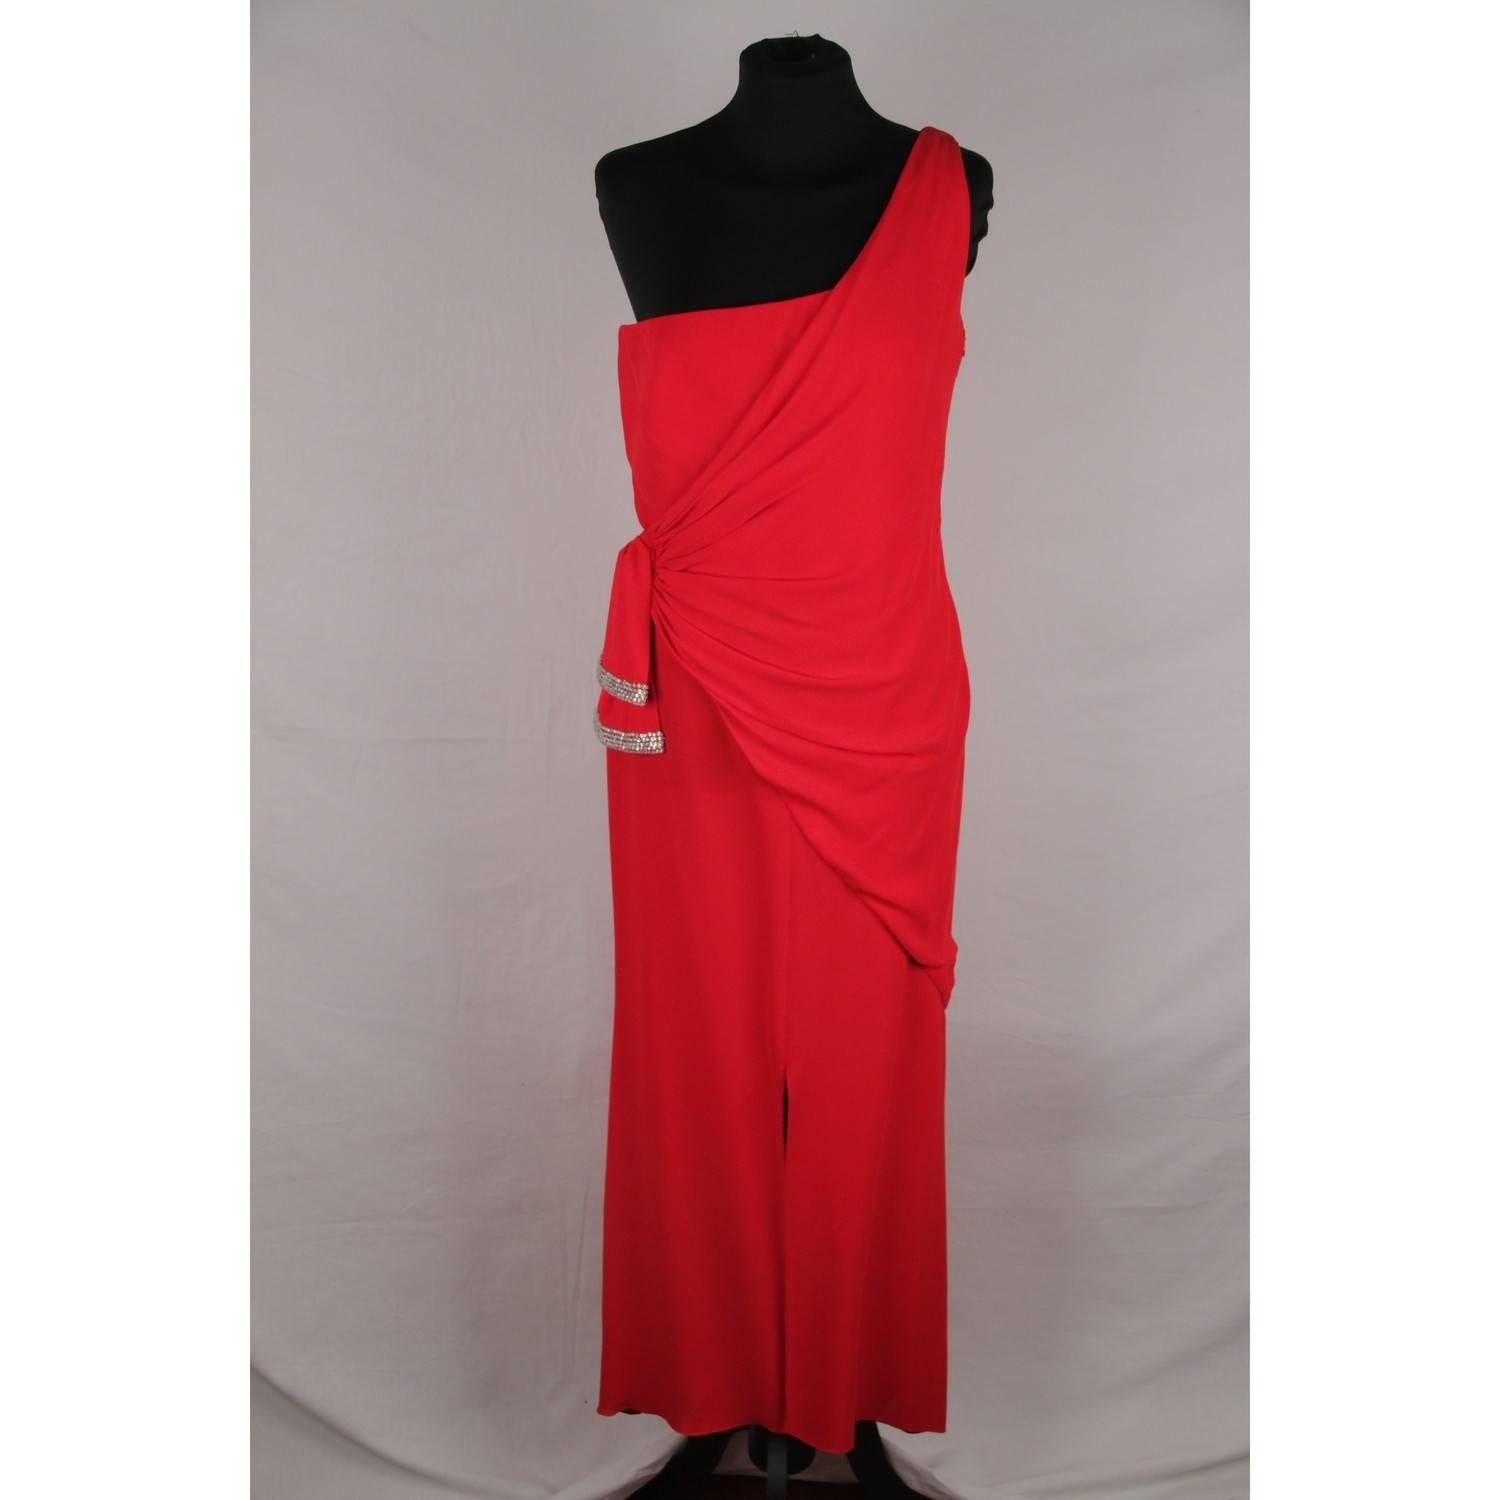 - Elegant VALENTINO one shoulder dress/gown in red  color
- Goddess Styling
-  Draping and knot detailing at the waist embellished with rhinestones 
- Side zip closure
- Front slit
- Size is not indicated. estimated size is a SMALL size